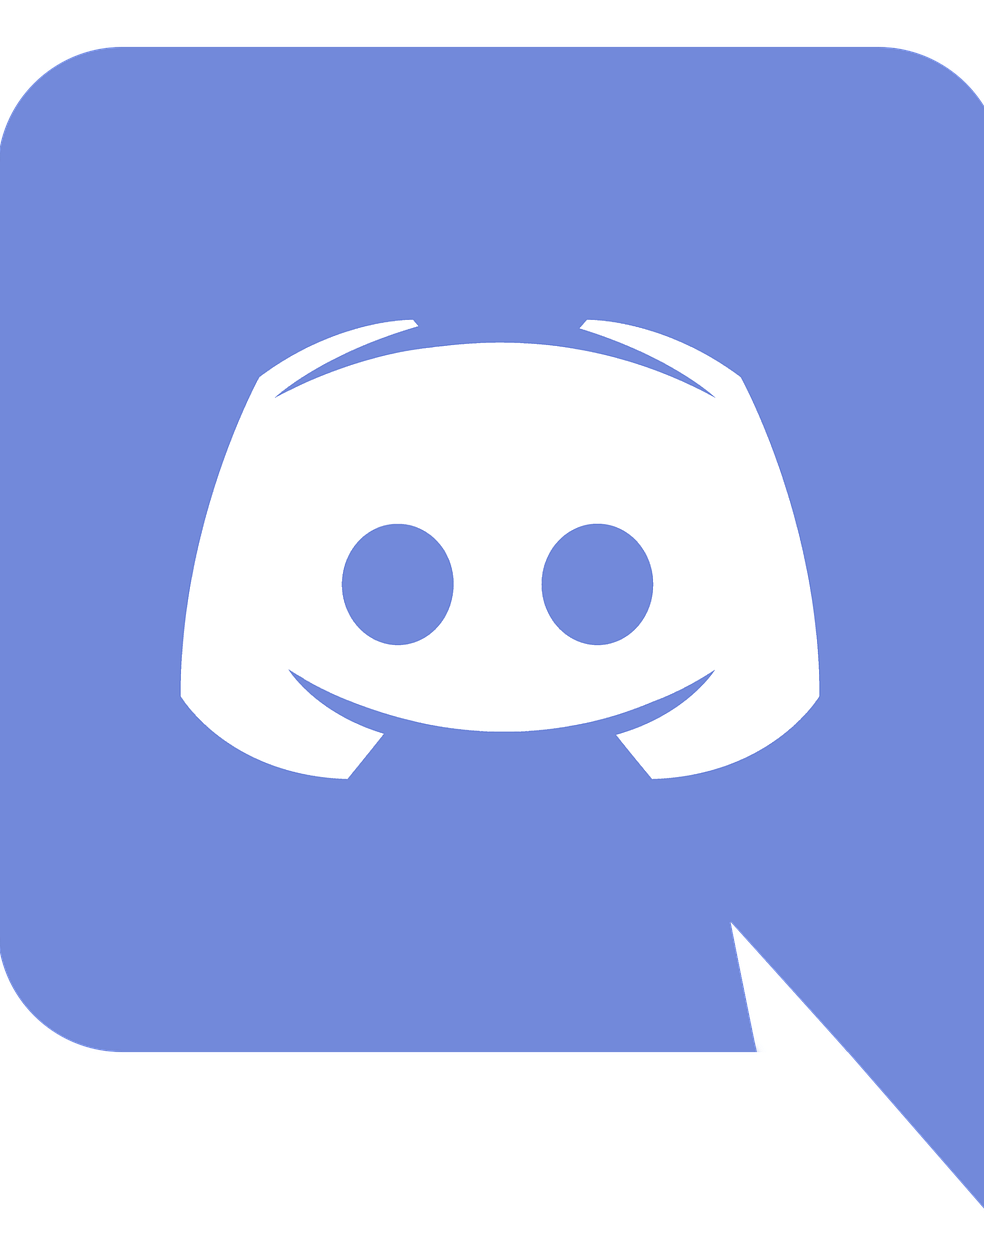 How to Set Up a Discord Account?